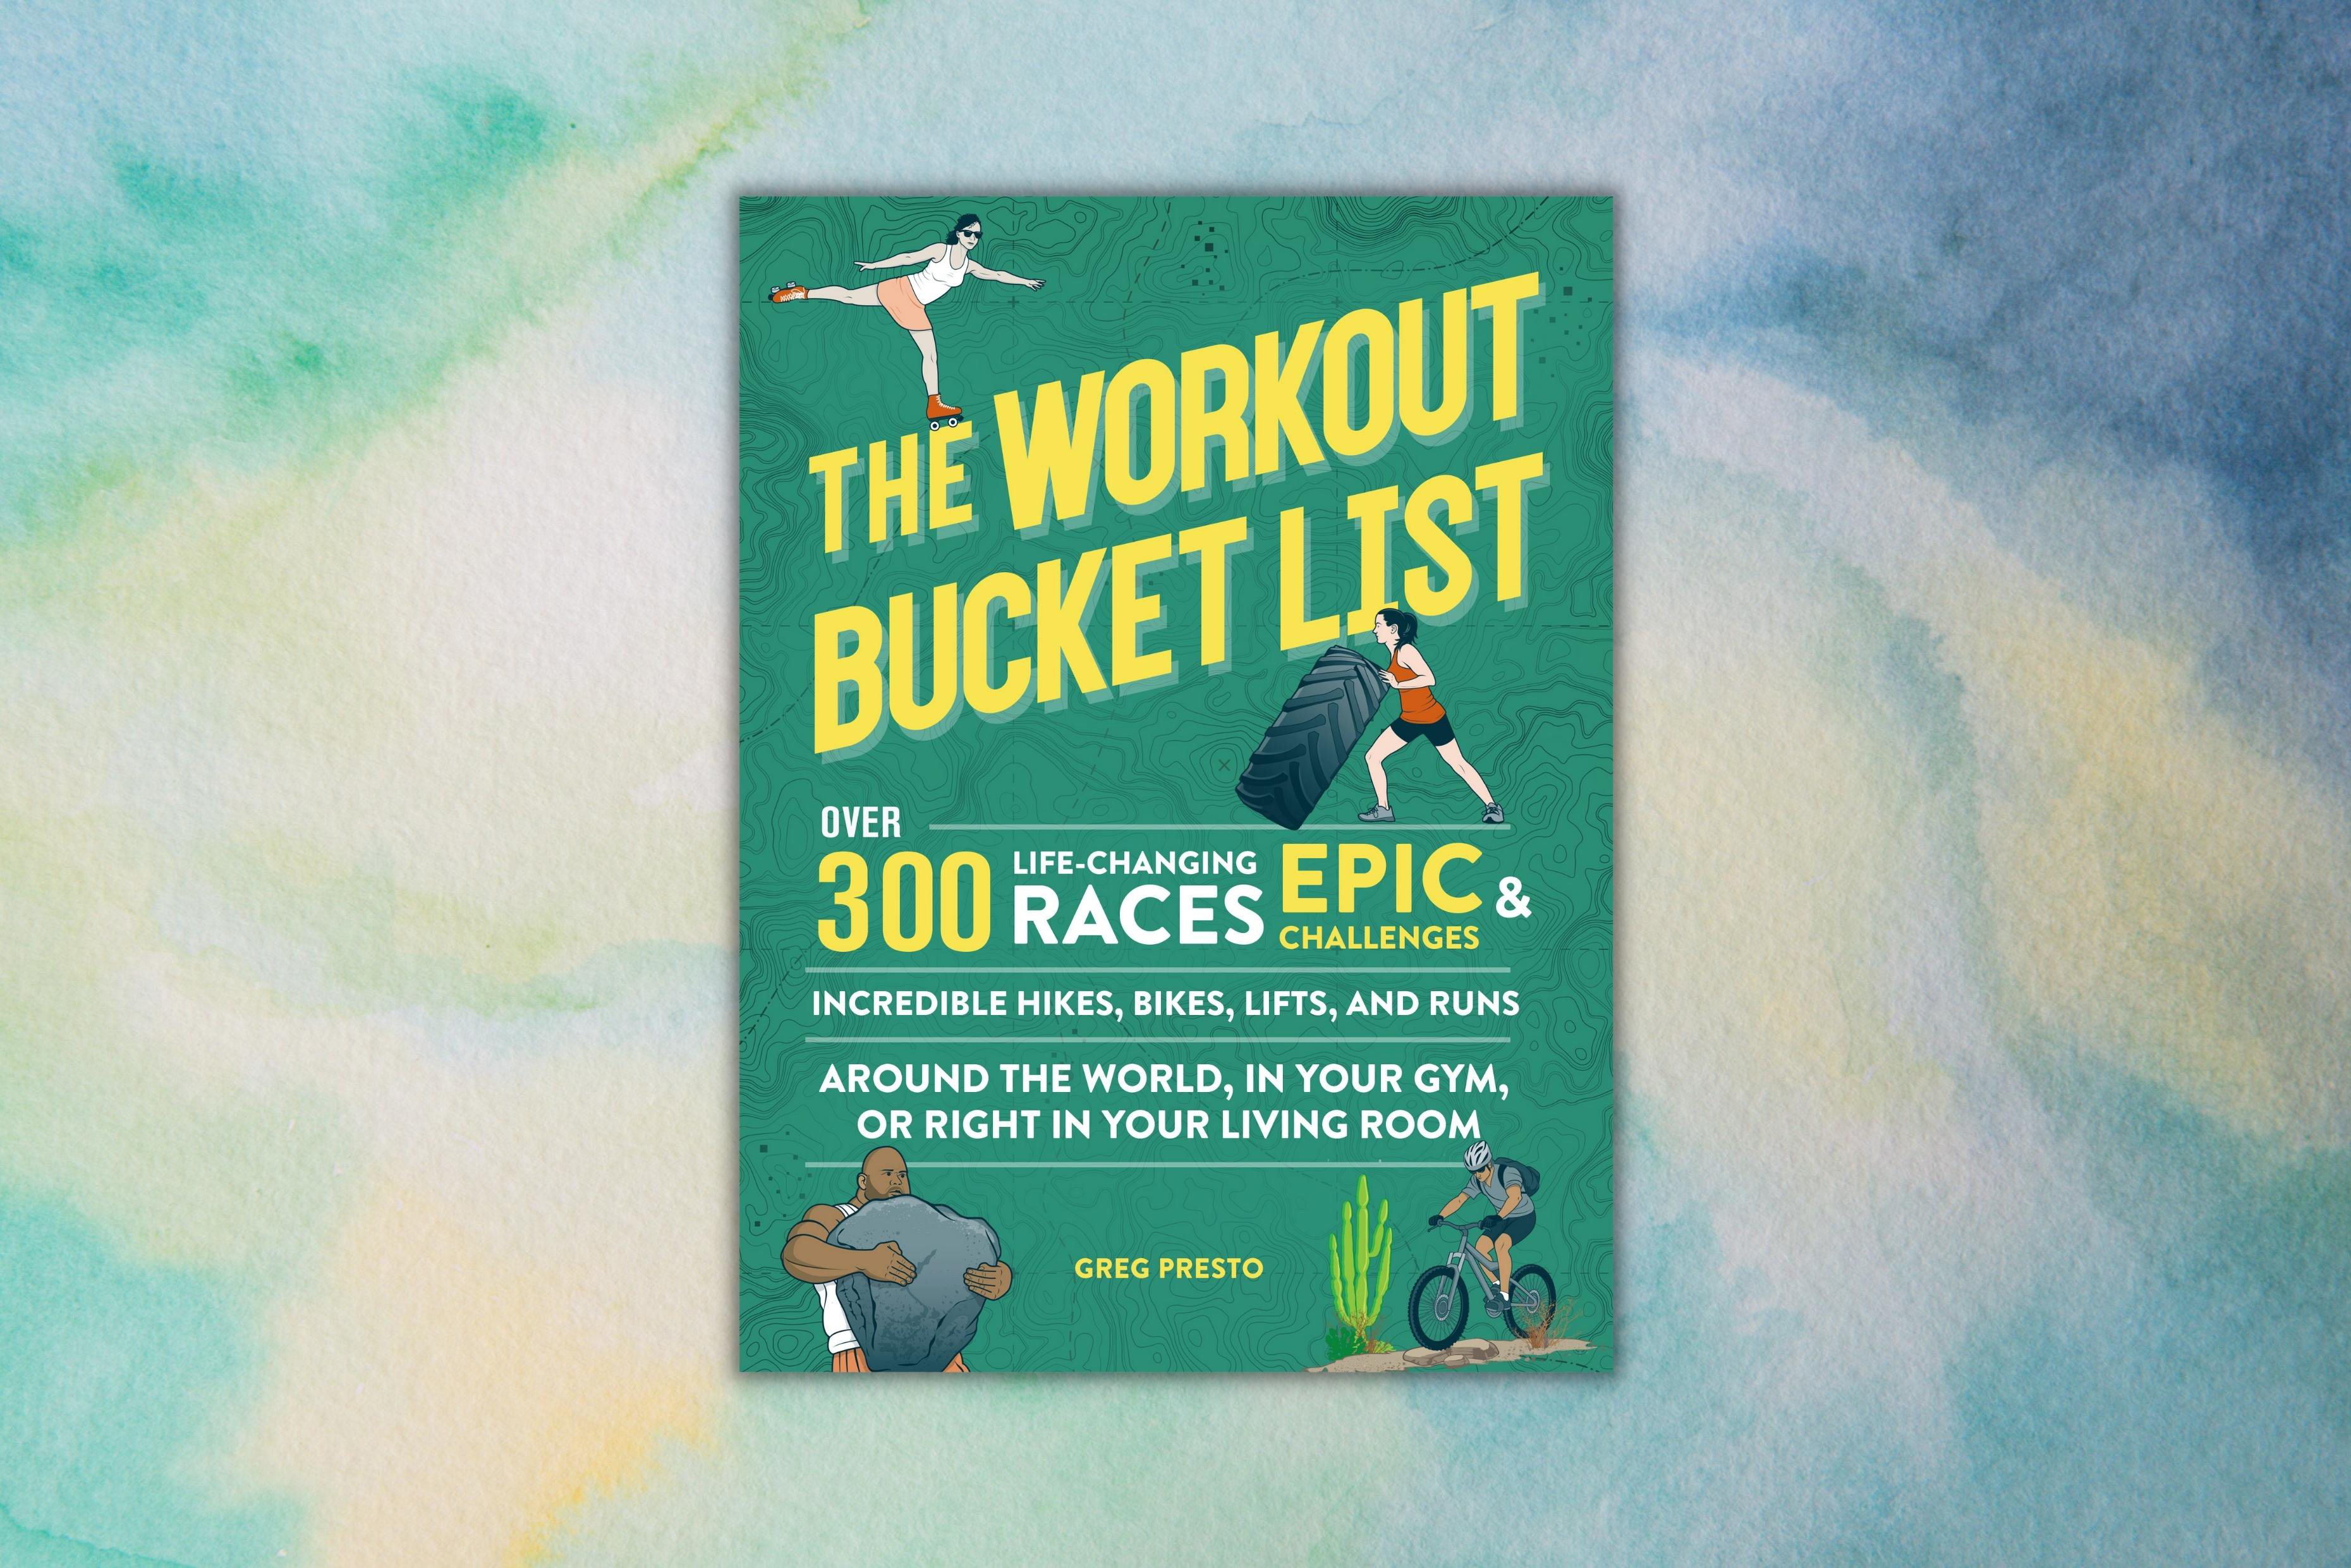 Collage of The Workout Bucket List book cover on top of blue watercolor background